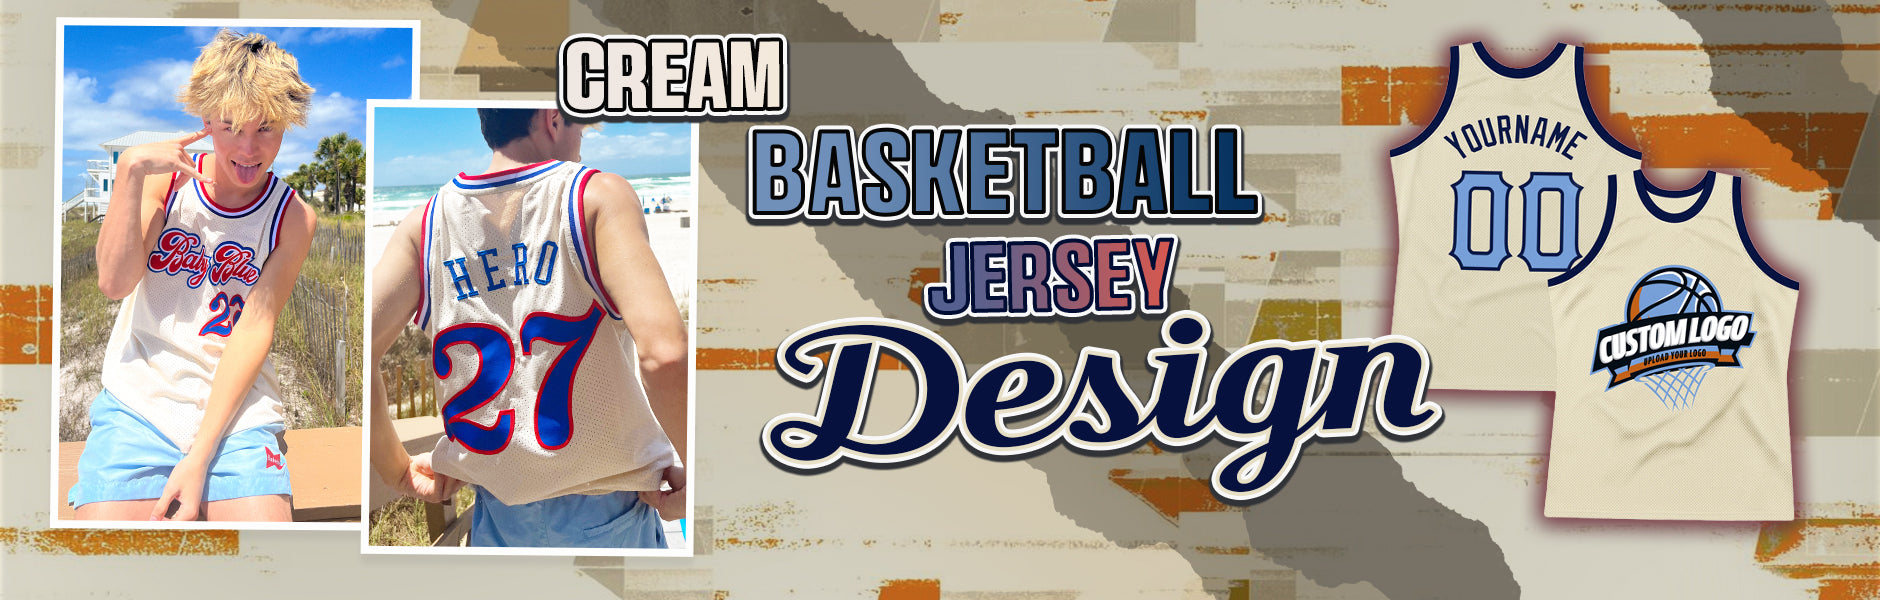 Custom Light Blue Gold Authentic Throwback Basketball Jersey in